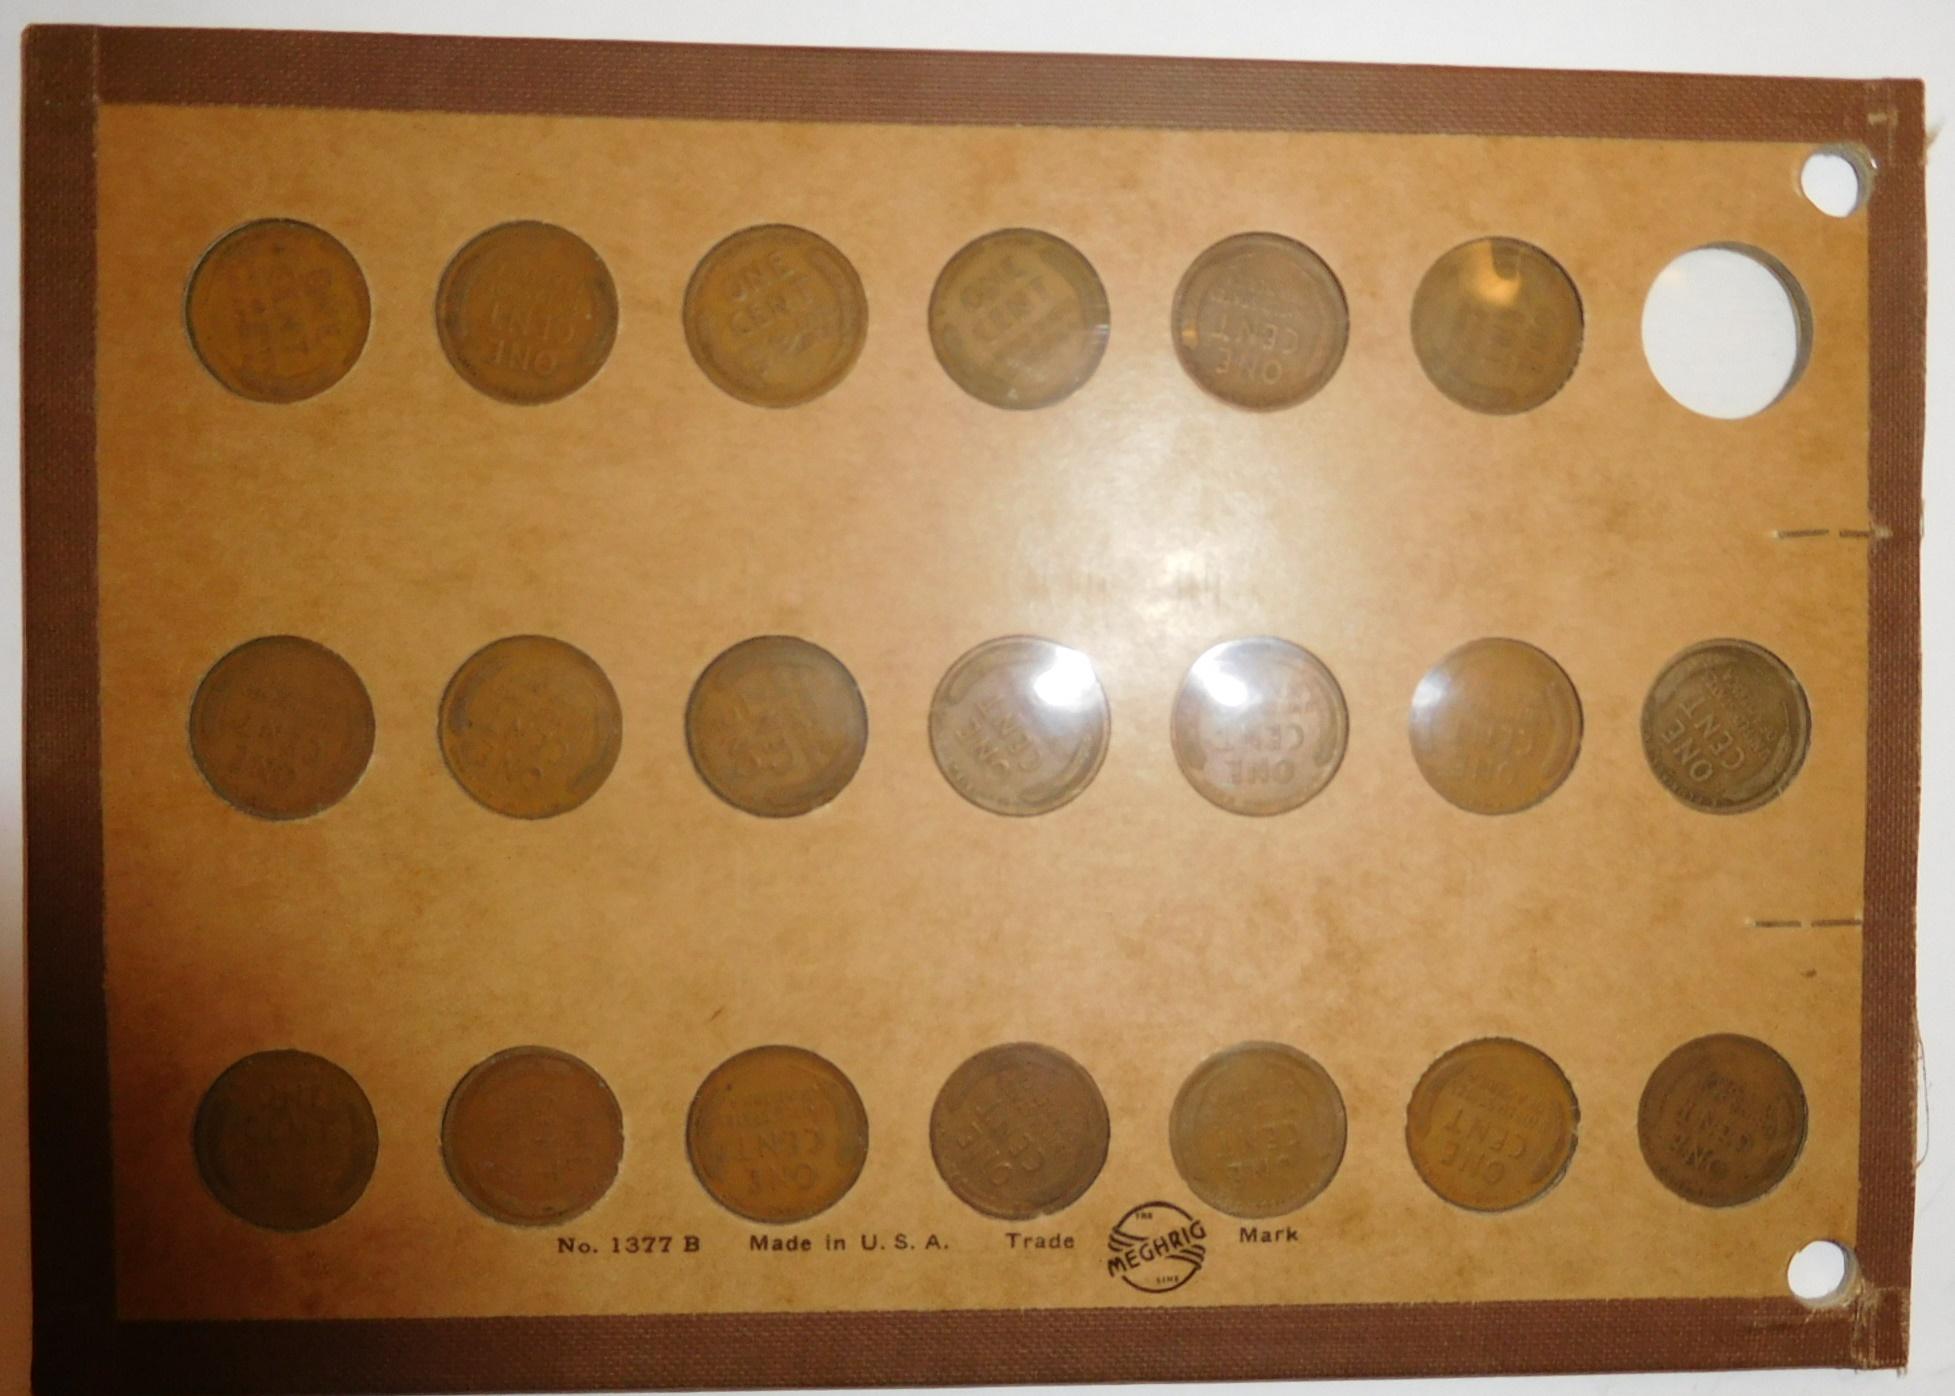 BEAUTIFUL LINCOLN CENT SET 1909-1958 IN OLD NATIONAL RING BINDER (140 COINS VG-BU)